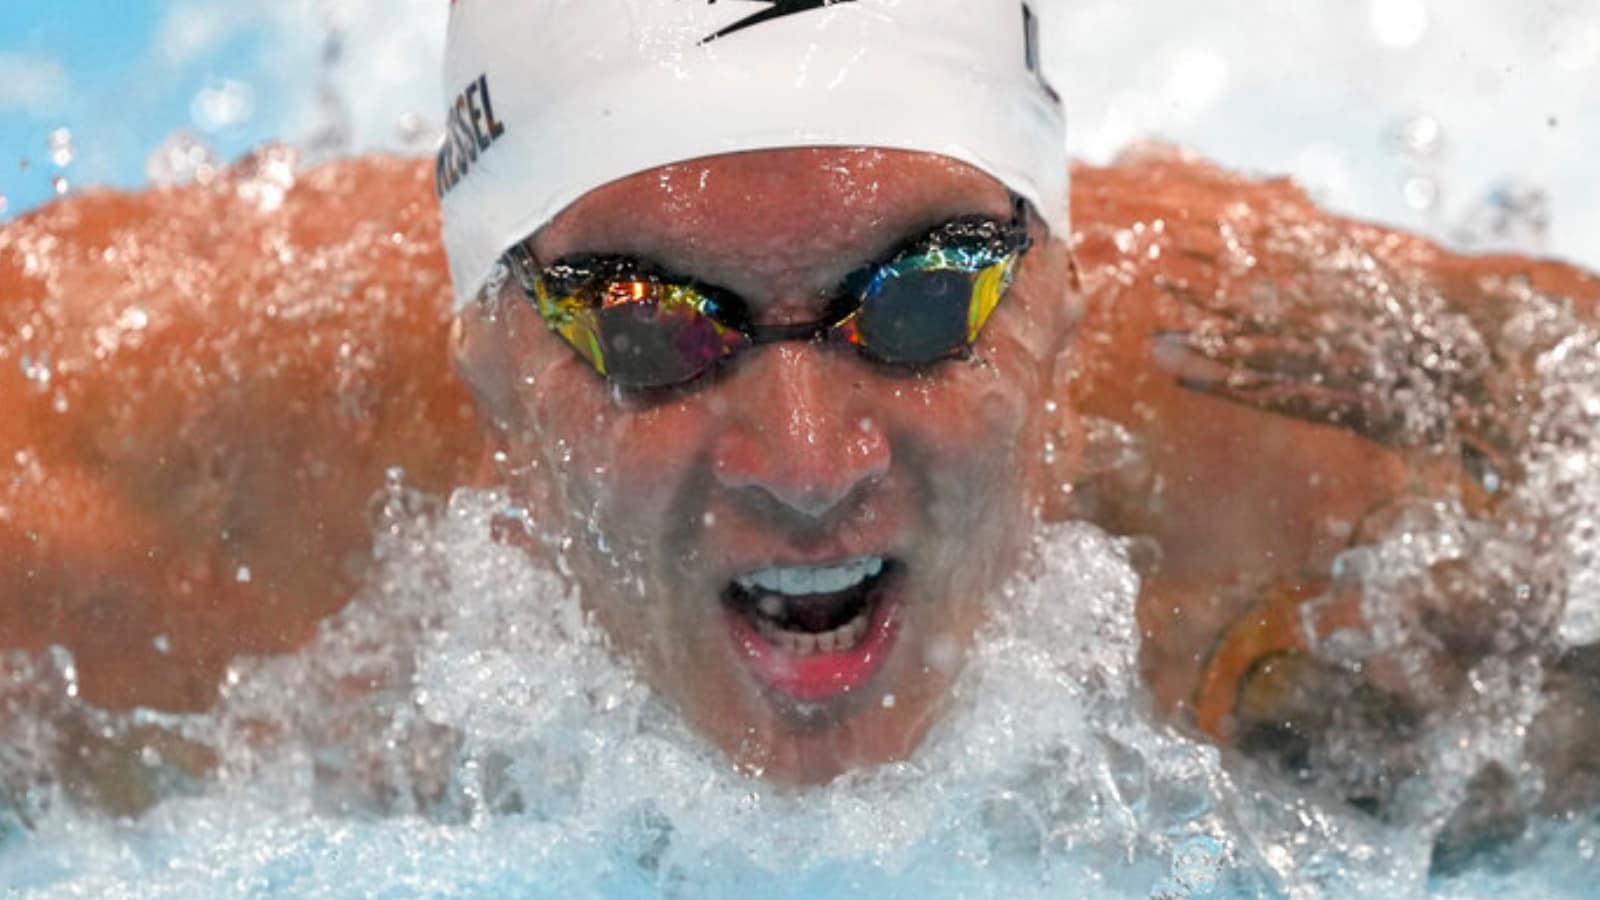 Tokyo Olympics Caleb Dressel Shatters World Record to Win 100m